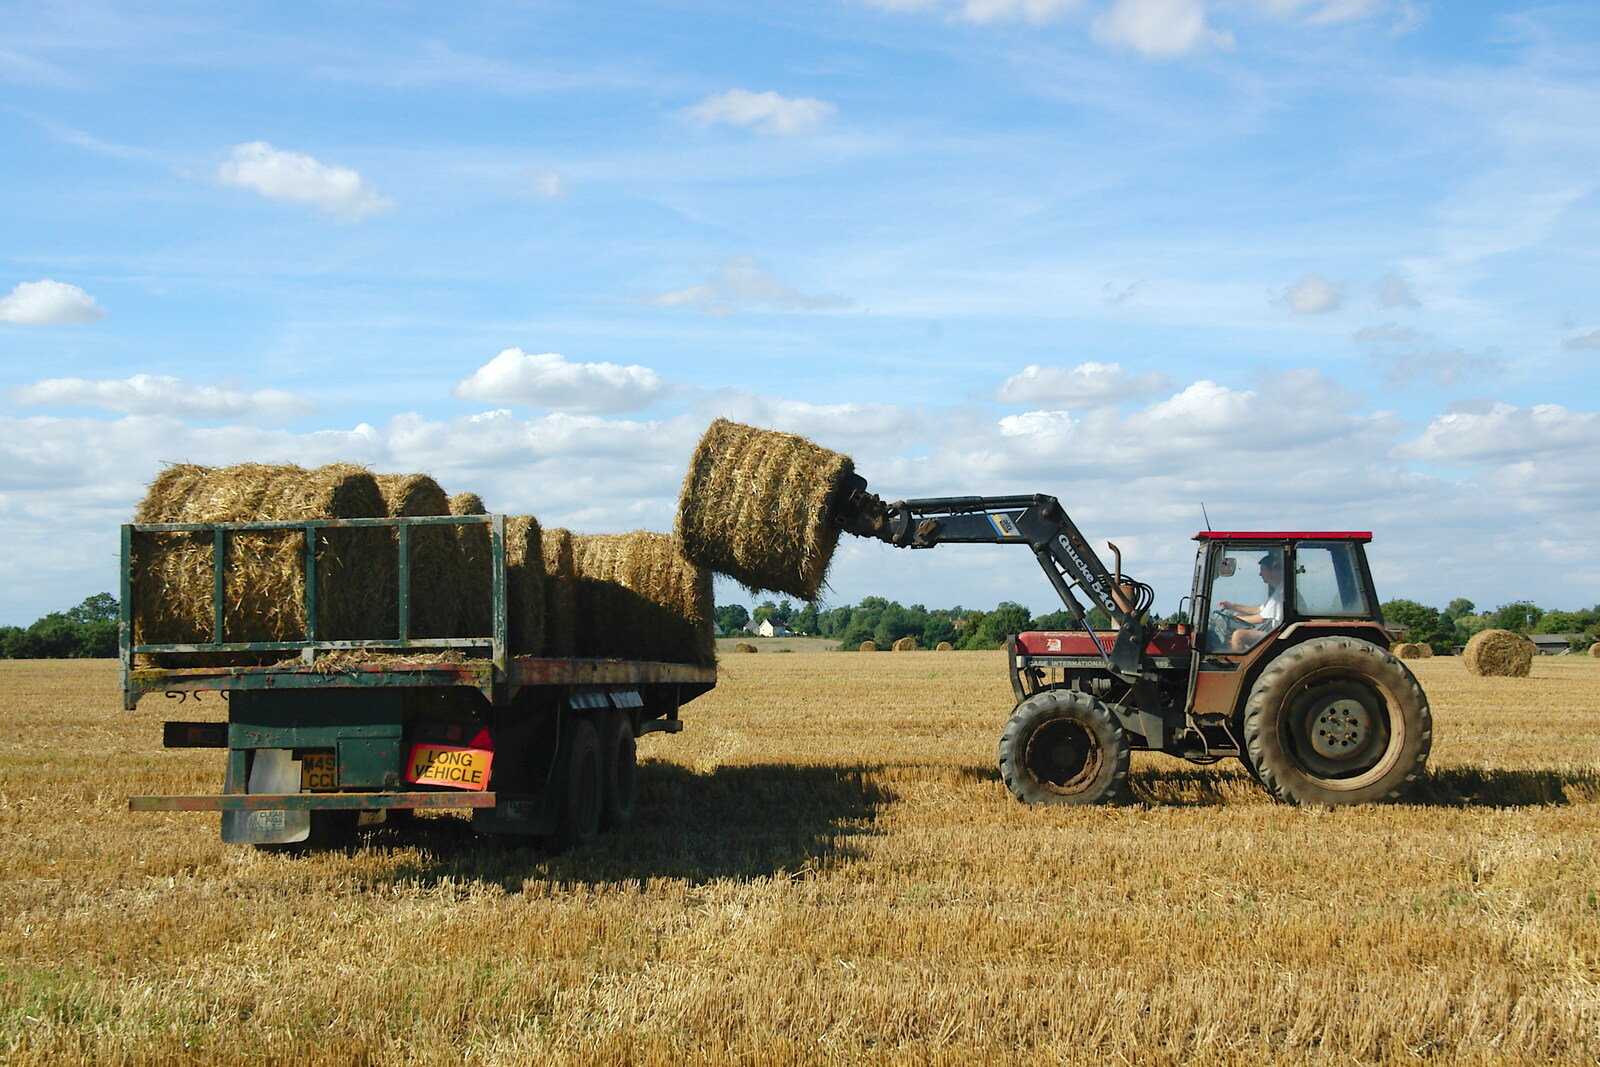 A bale is loaded onto a trailer from Life on the Neonatal Ward, Dairy Farm and Thrandeston Chapel, Suffolk - 26th August 2005